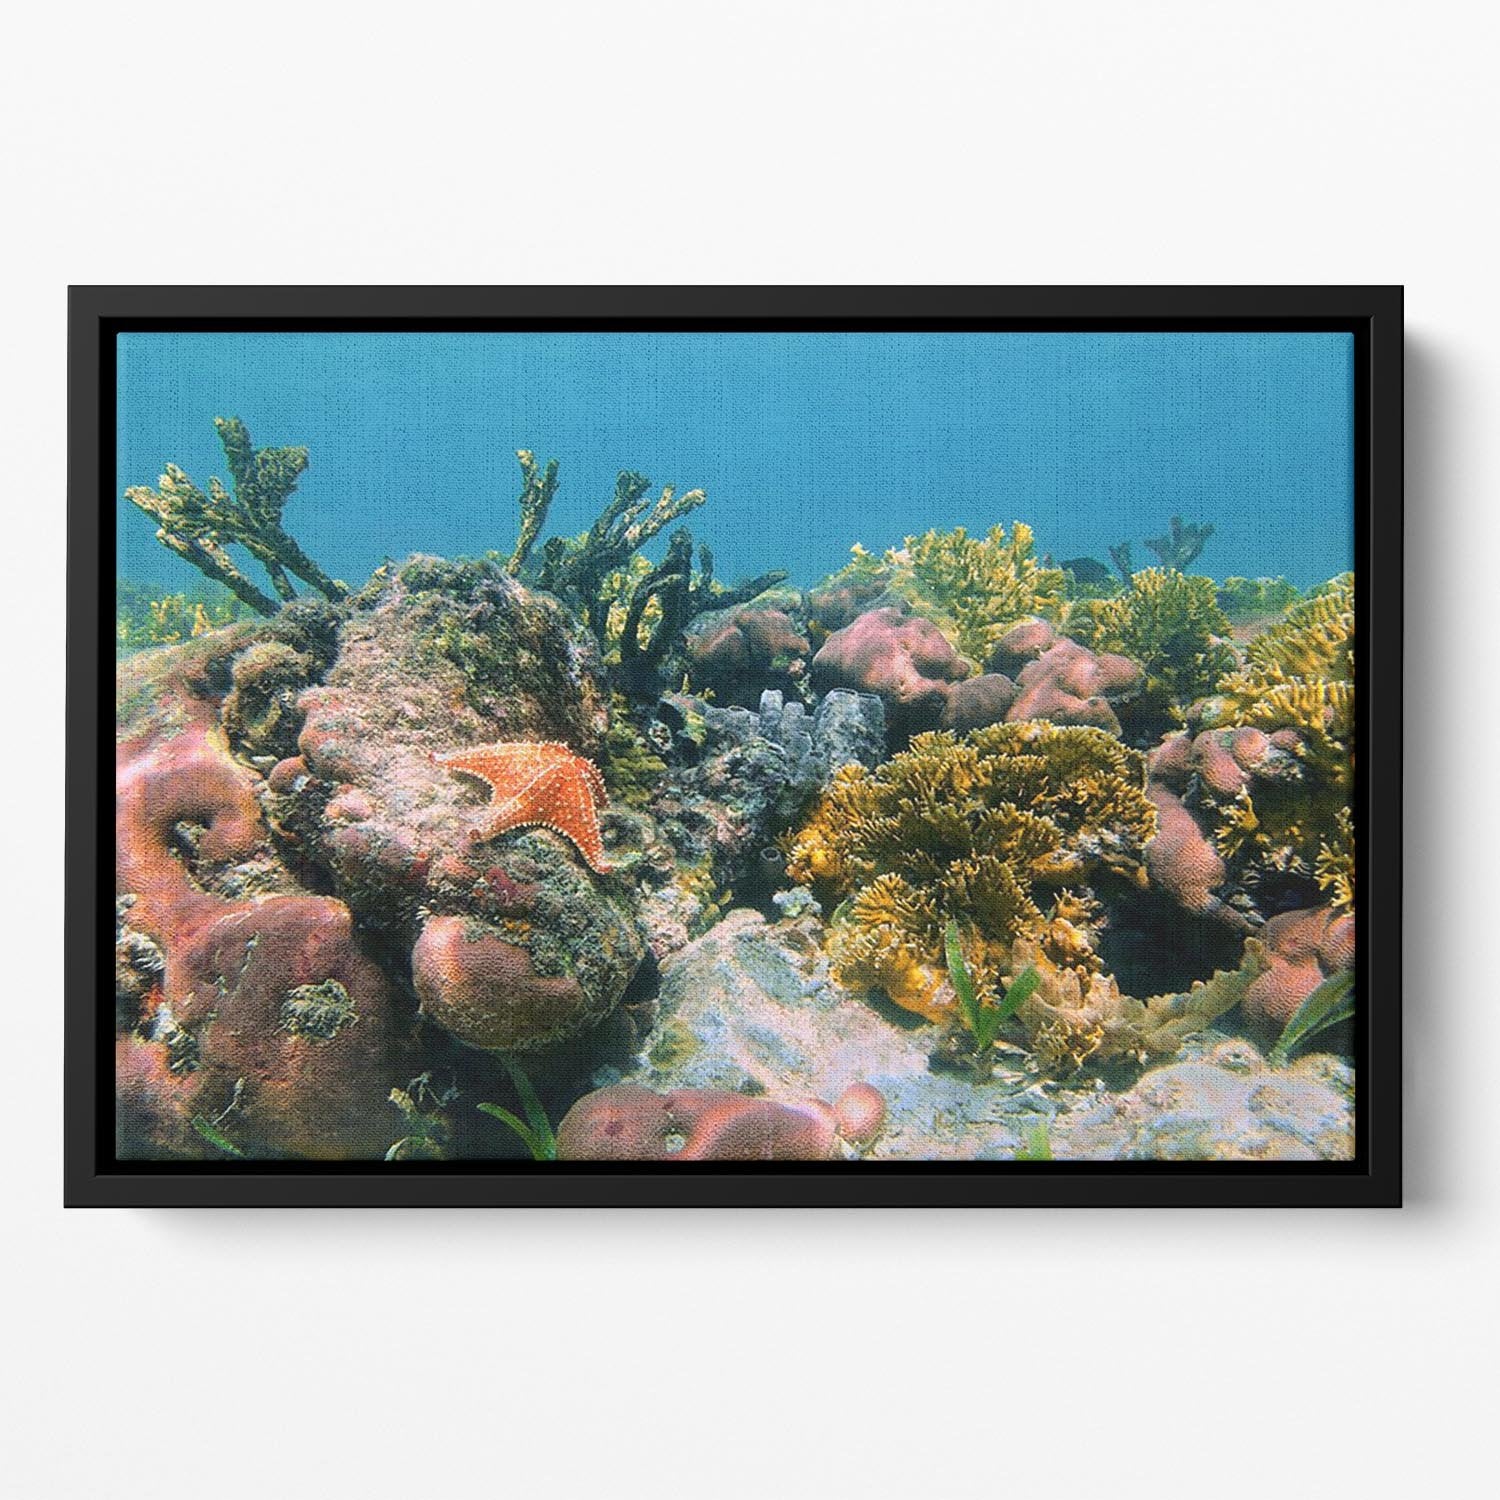 Underwater reef in the Caribbean sea with corals sponges and a starfish Floating Framed Canvas - Canvas Art Rocks - 2